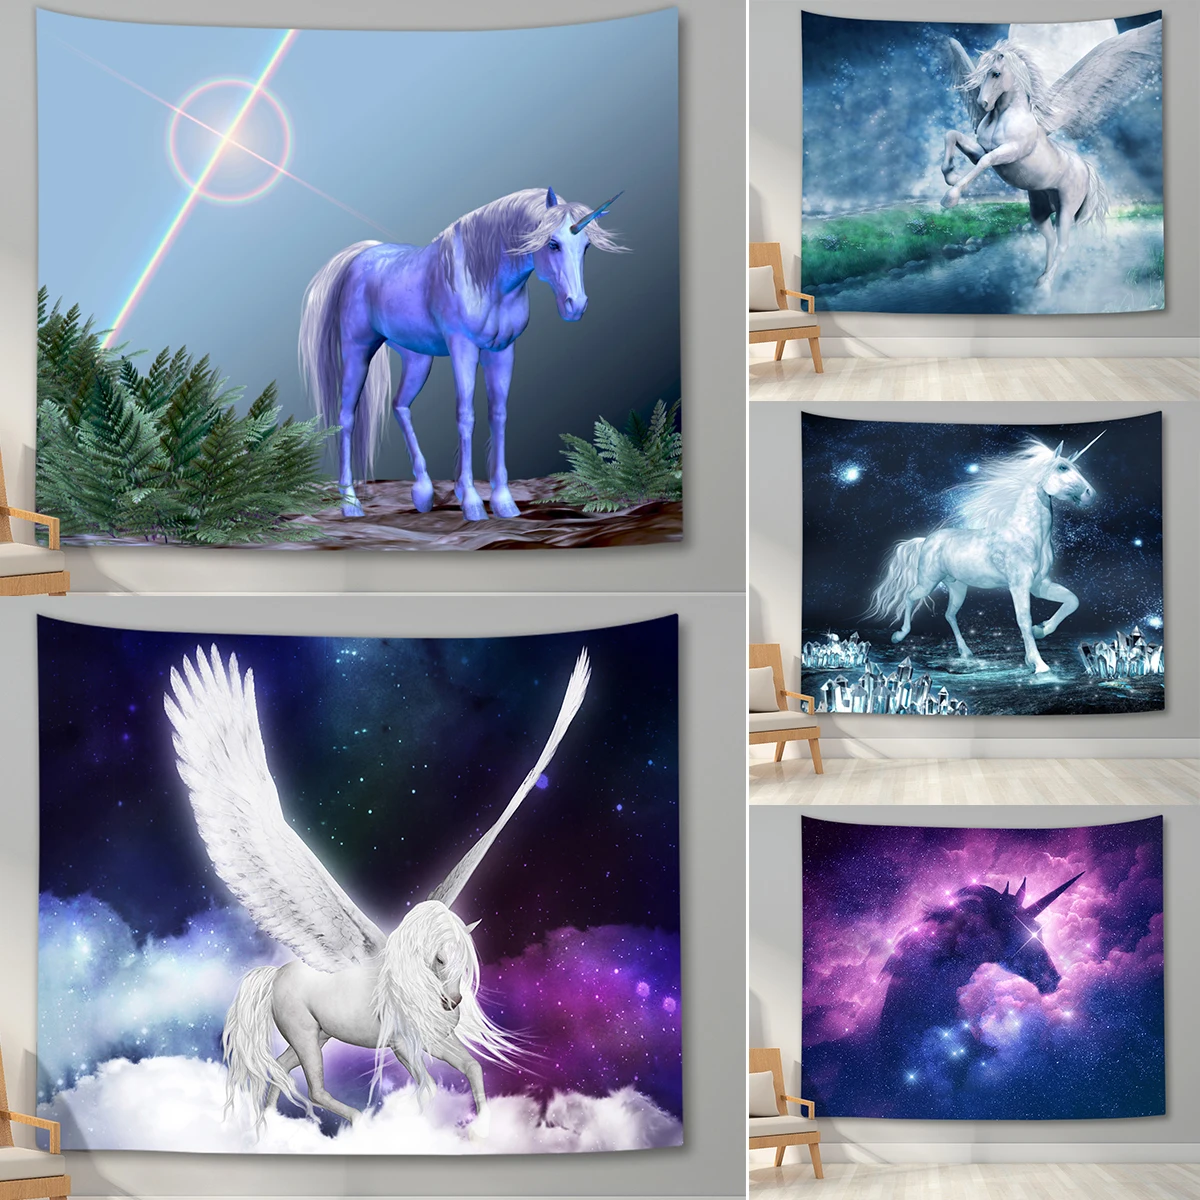 

Unicorn Psychedelic Tapestry Myth Flying Horse With Wings Wall Hanging Tapestries For Living Room Bedroom Dorm Home Decor Carpet